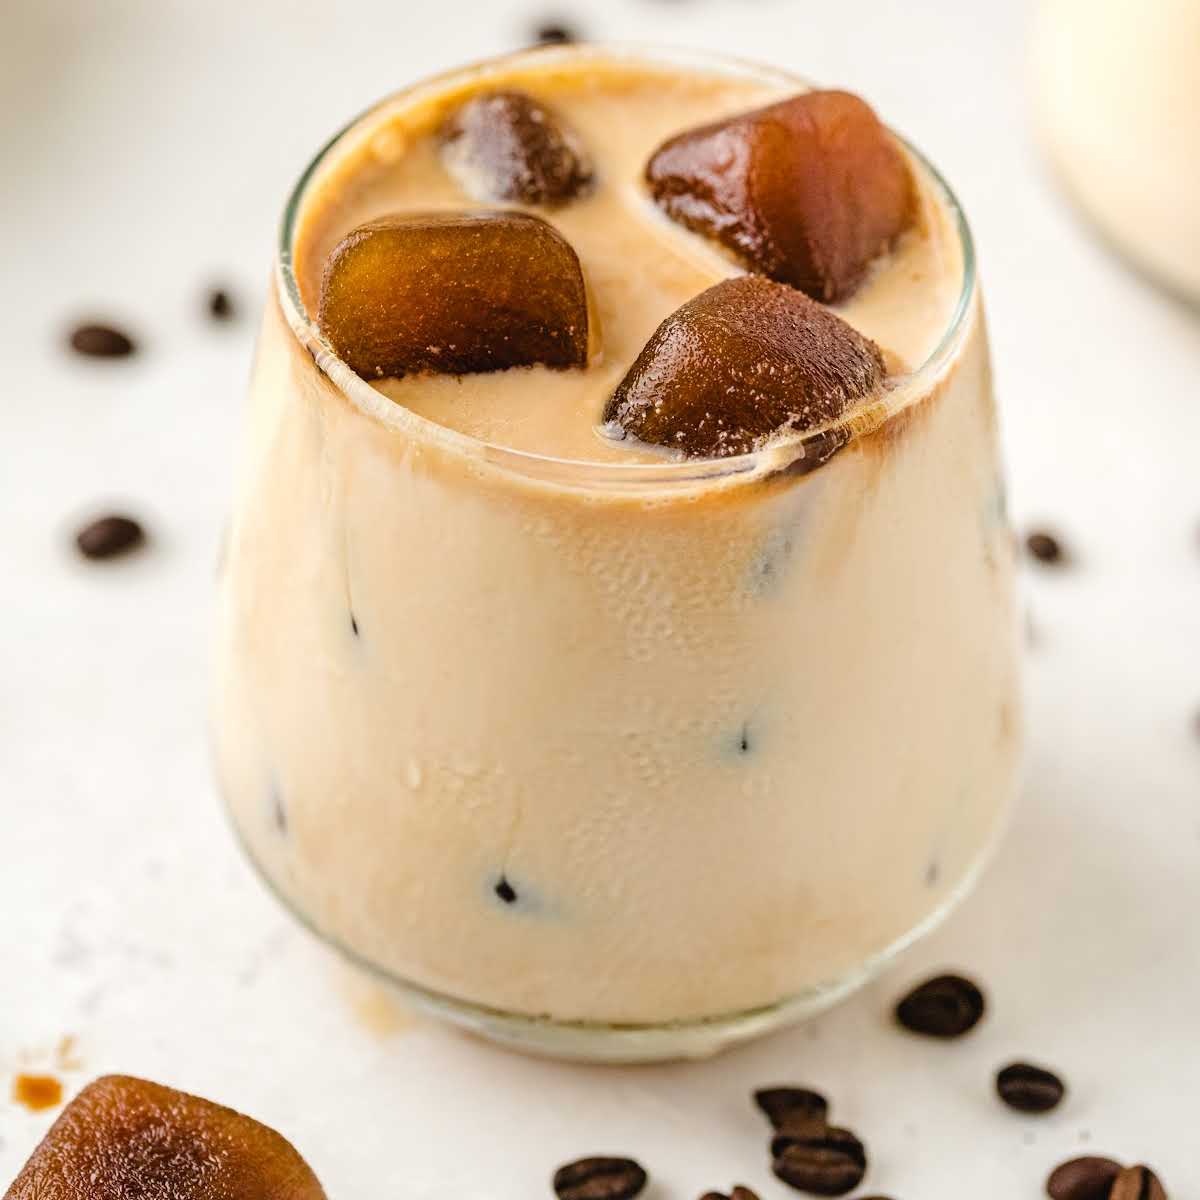 https://spaceshipsandlaserbeams.com/wp-content/uploads/2021/06/Baileys-and-Coffee-Ice-Cubes-Recipe-card.jpg